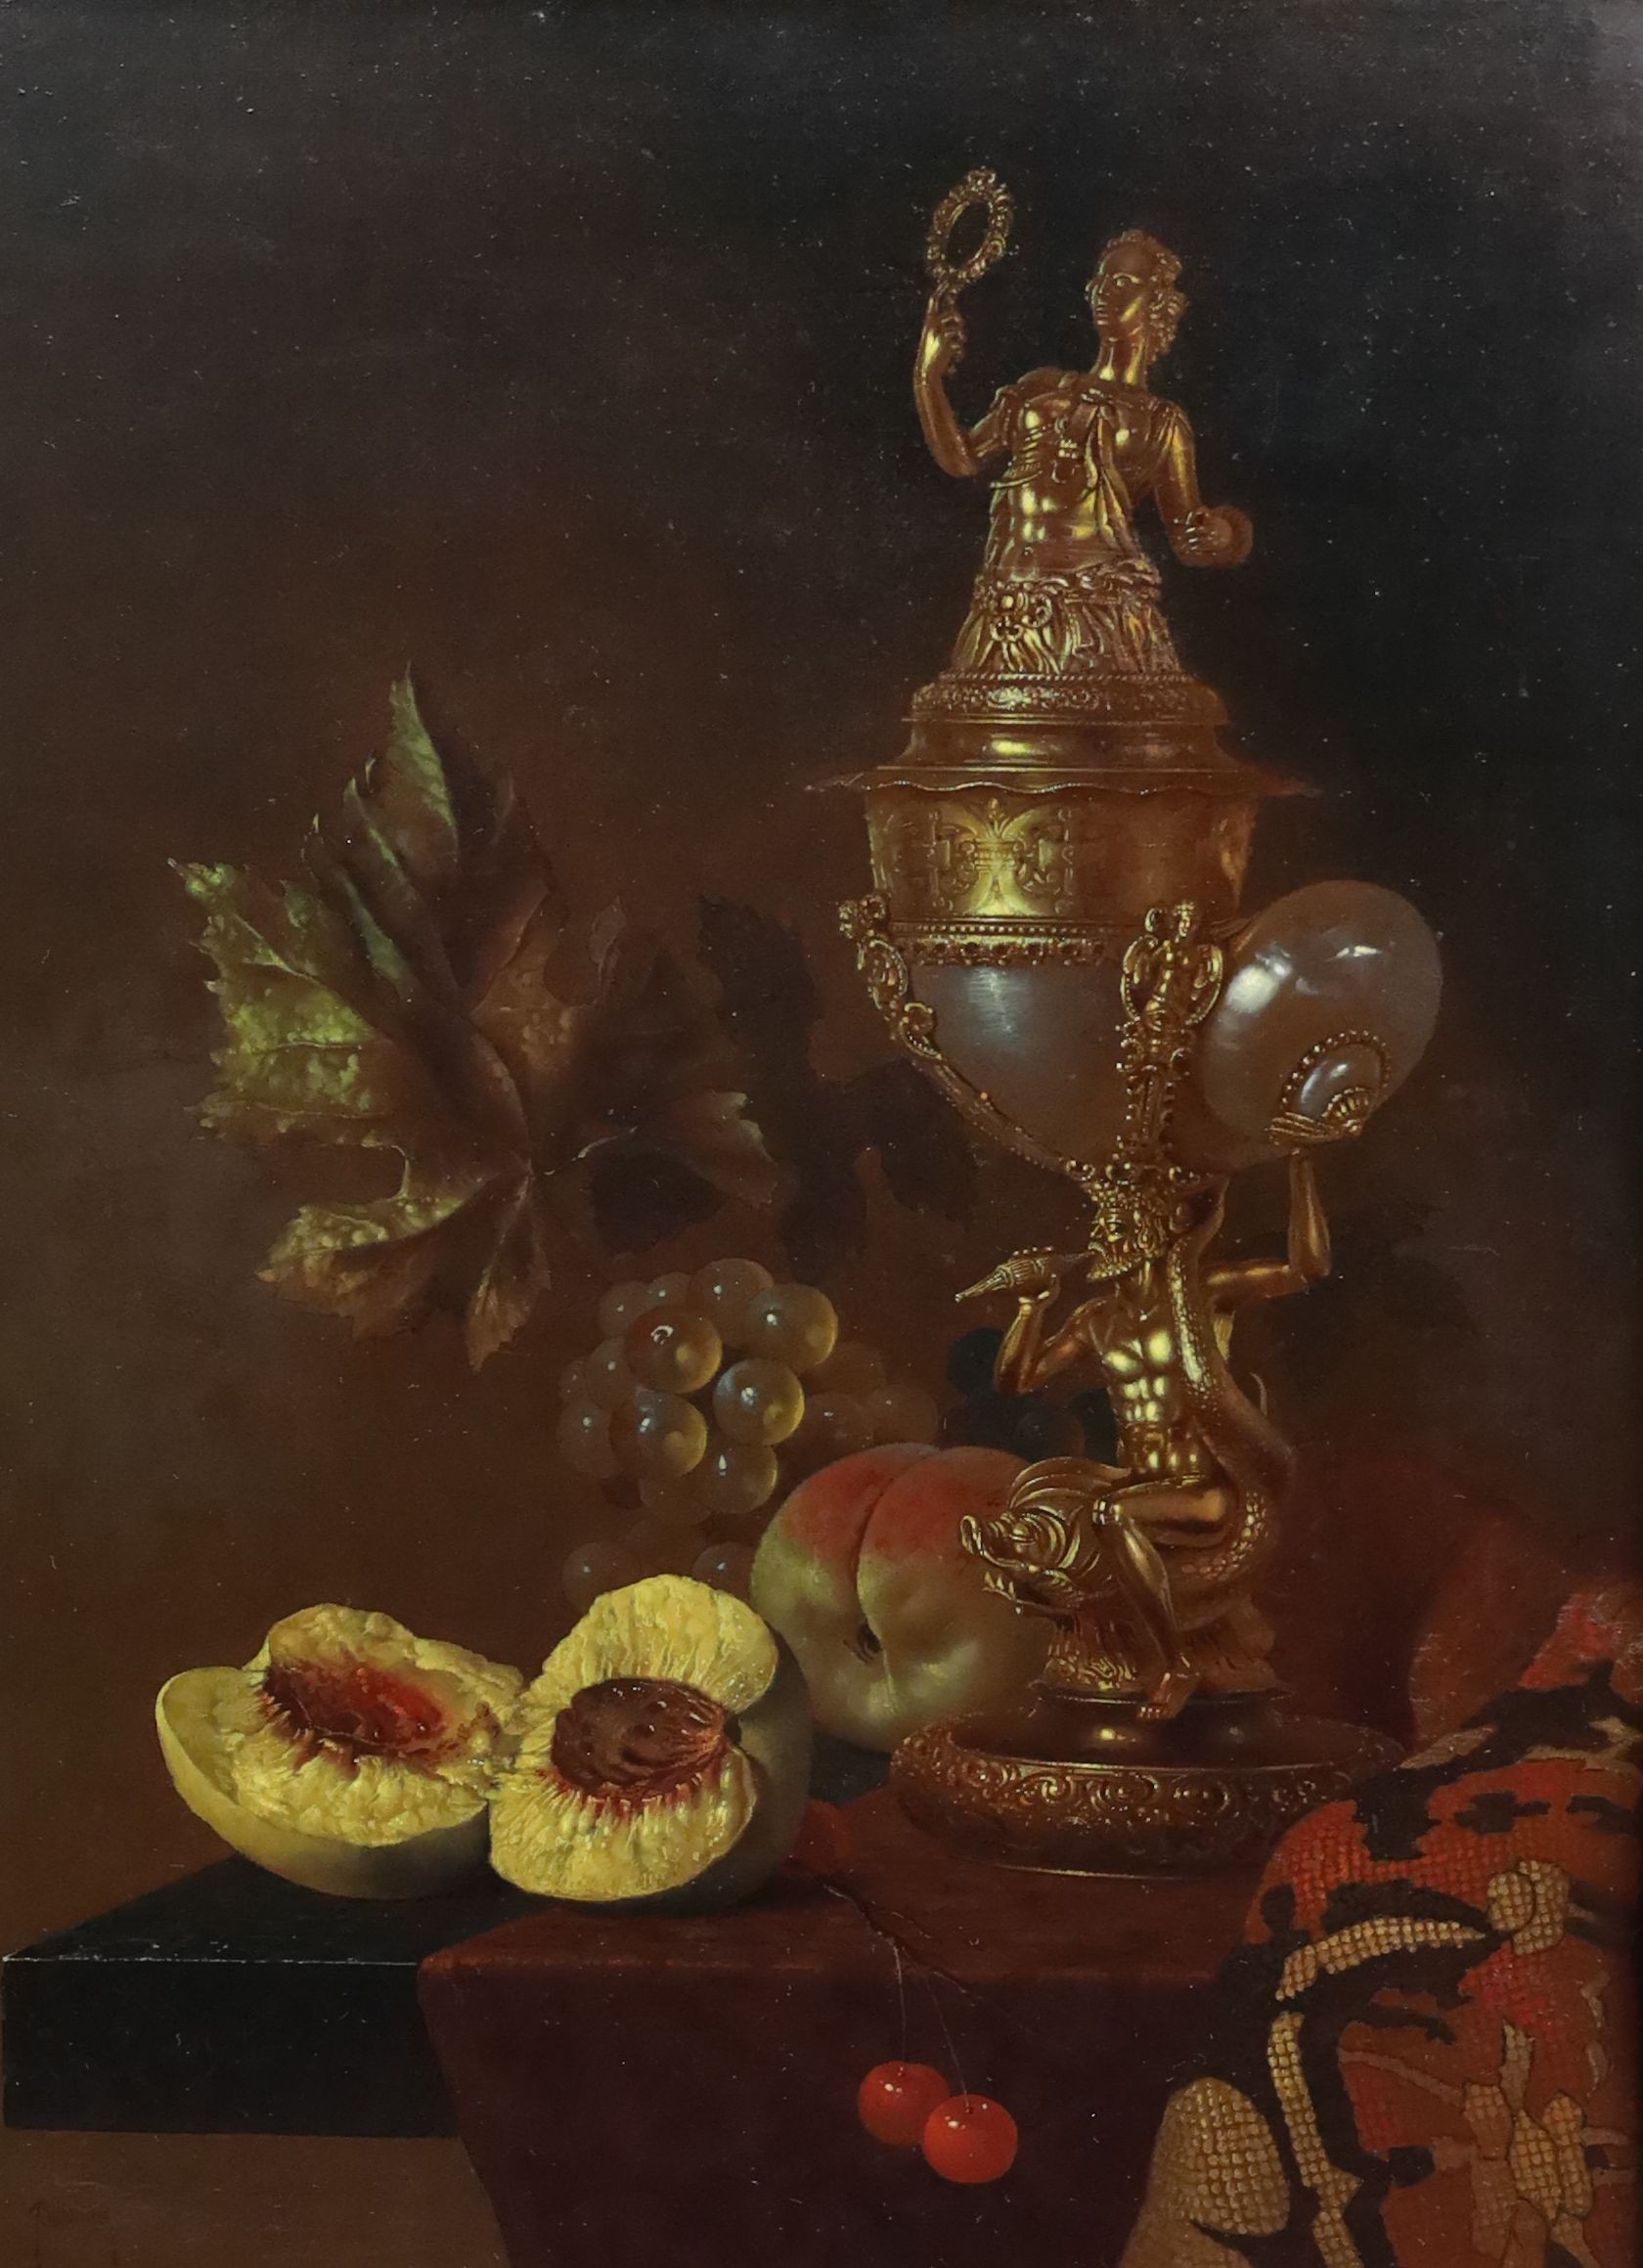 Gyula Bubarnik (Hungarian, 1936-2010), 17th century style still life of a silver gilt nautilus cup and fruit upon a table top, oil on panel, 40 x 30cm